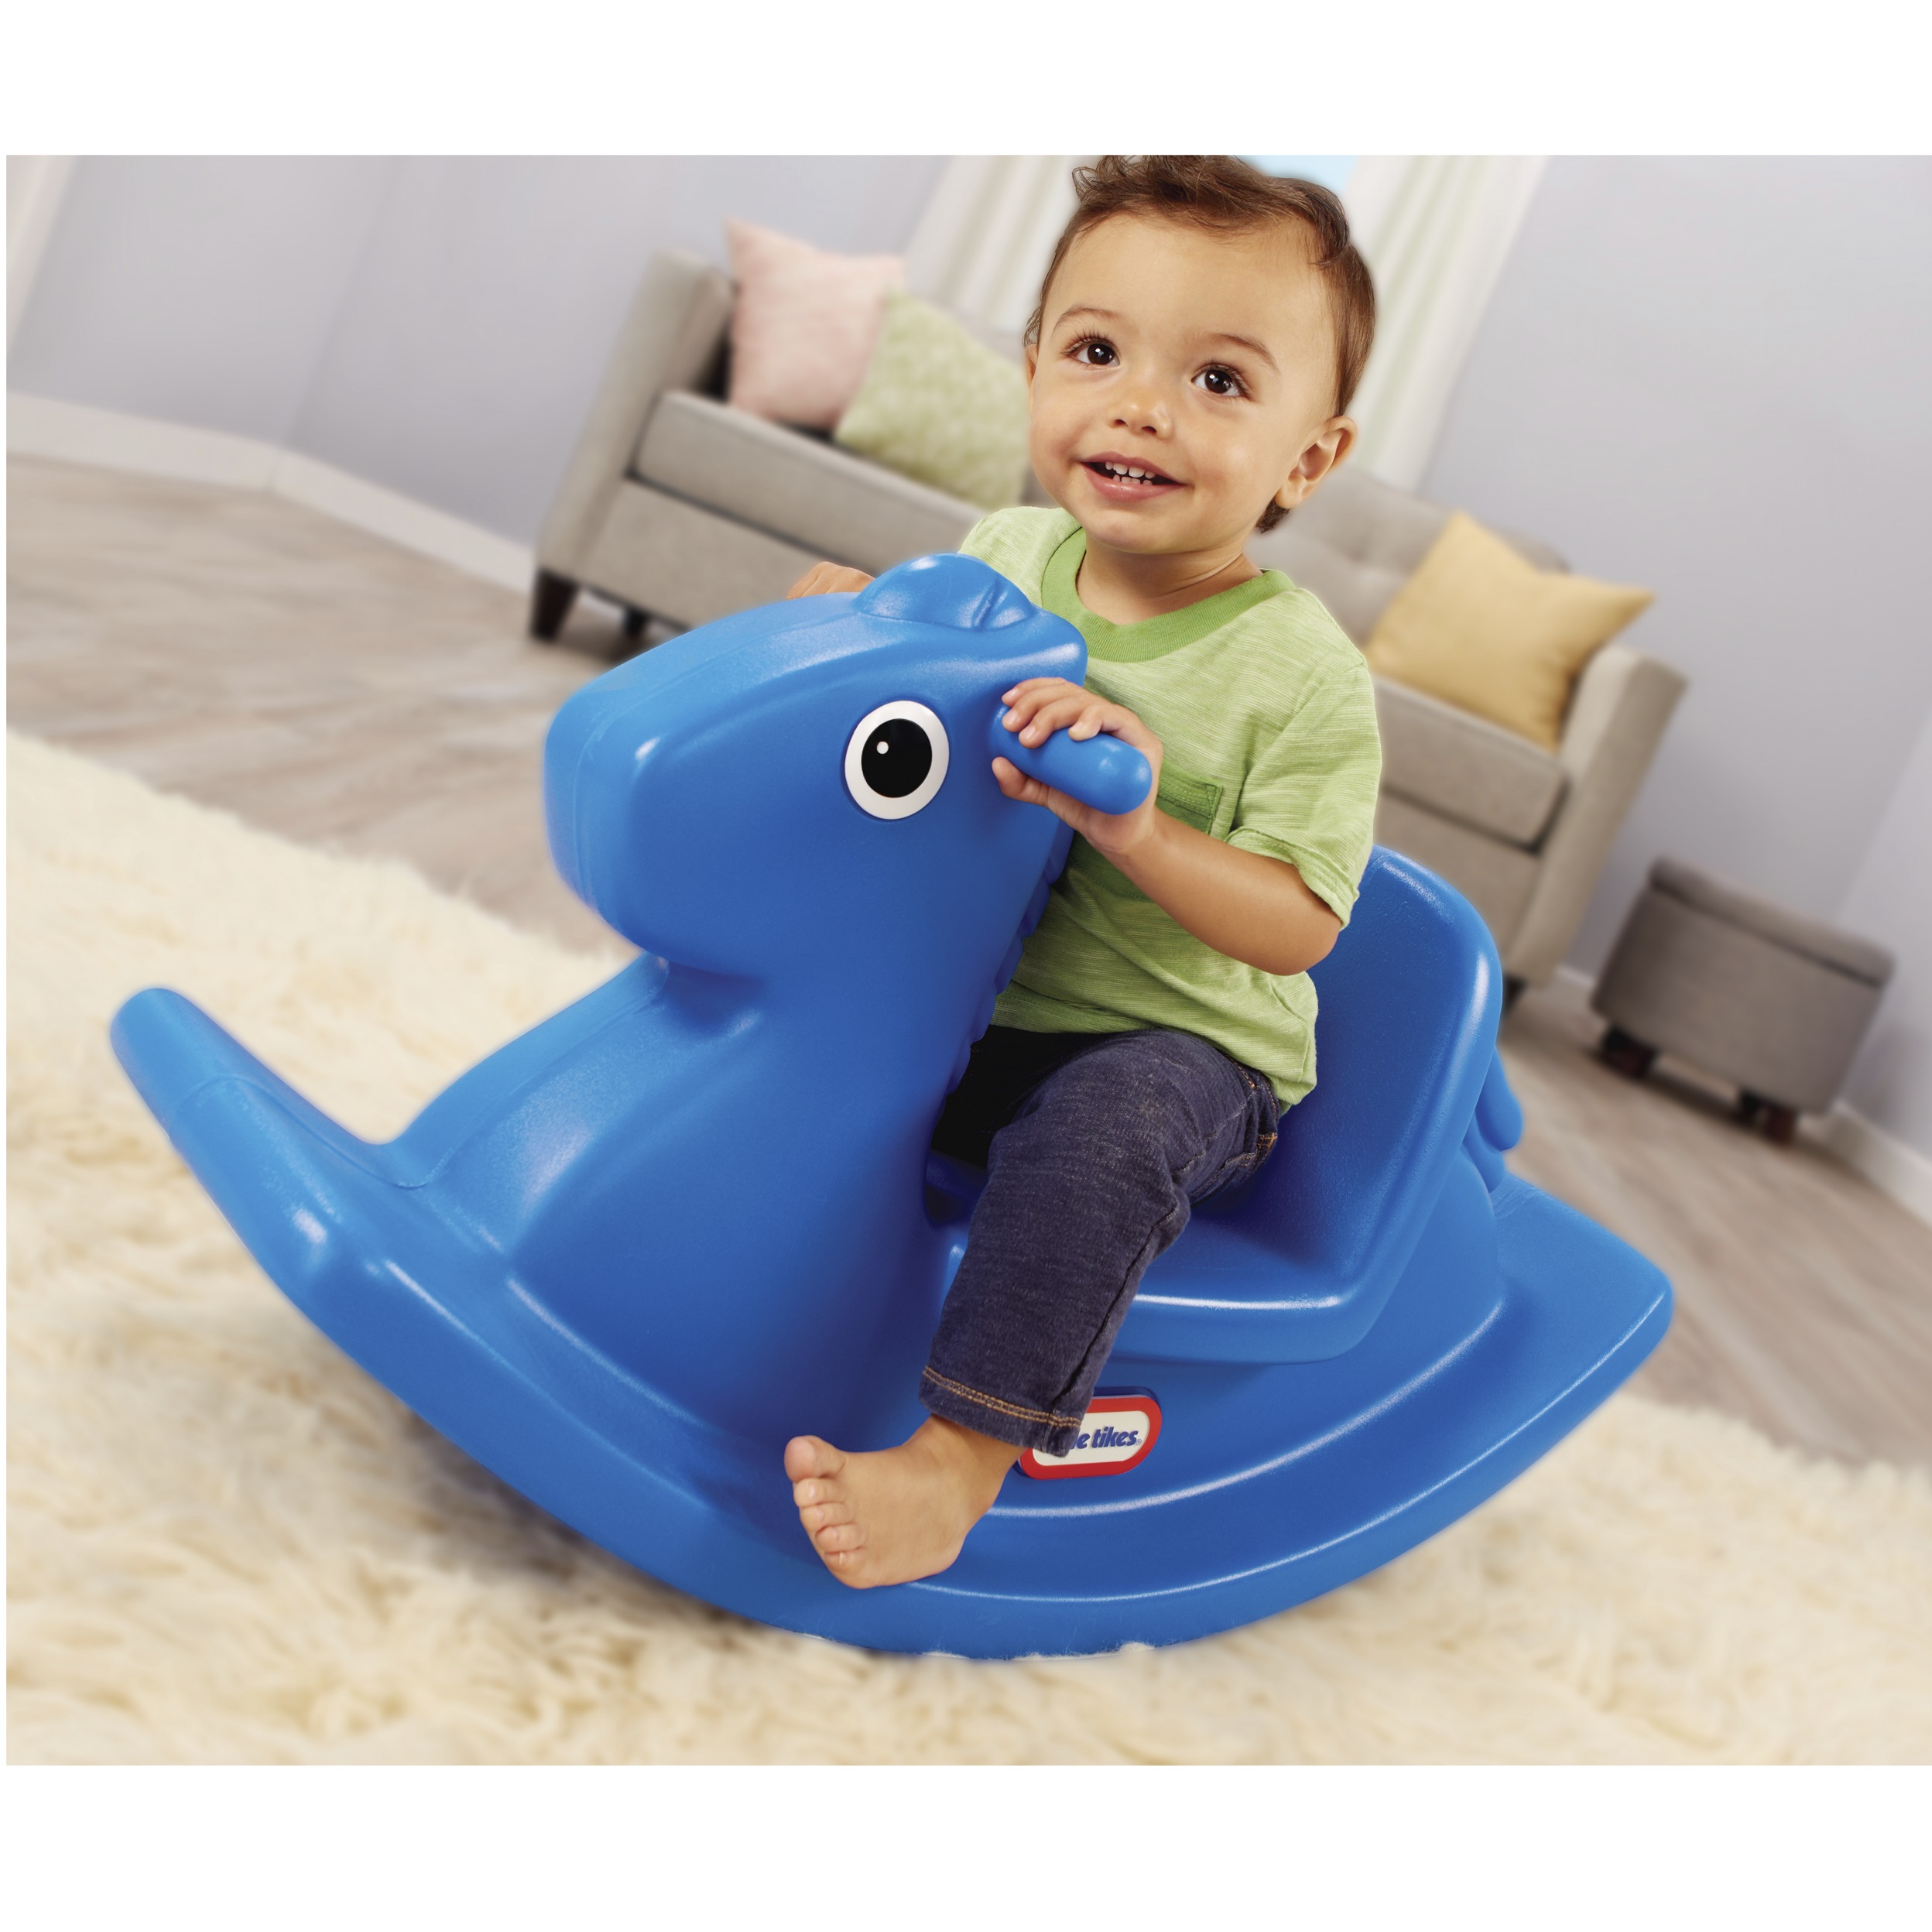 Little Tikes Outdoor & Indoor Balance Rocking Horse Toddlers, Girls Boys, Blue - image 4 of 5